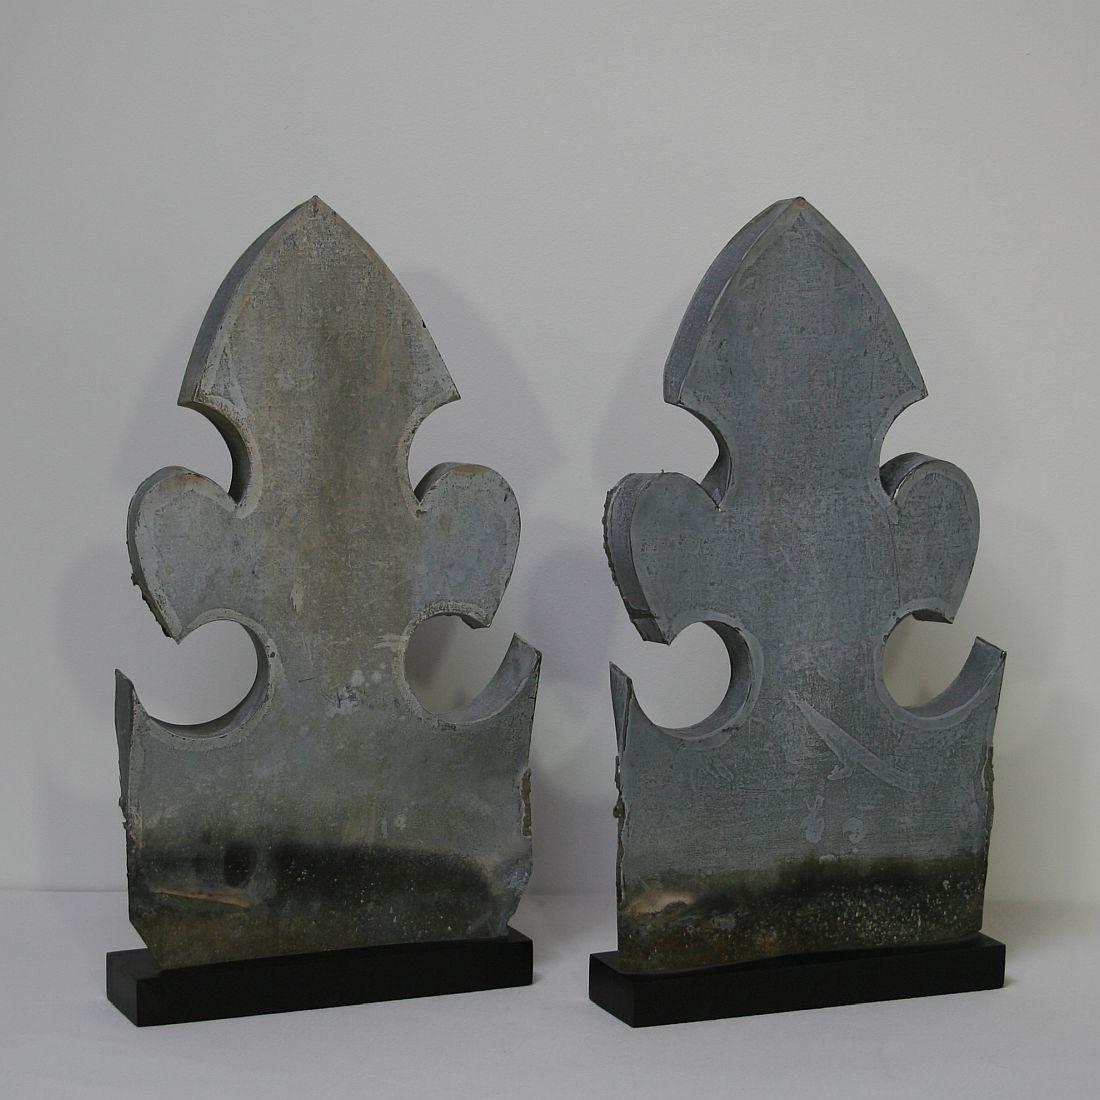 Belle Époque Pair of French 19th Century Zinc Roof Finials